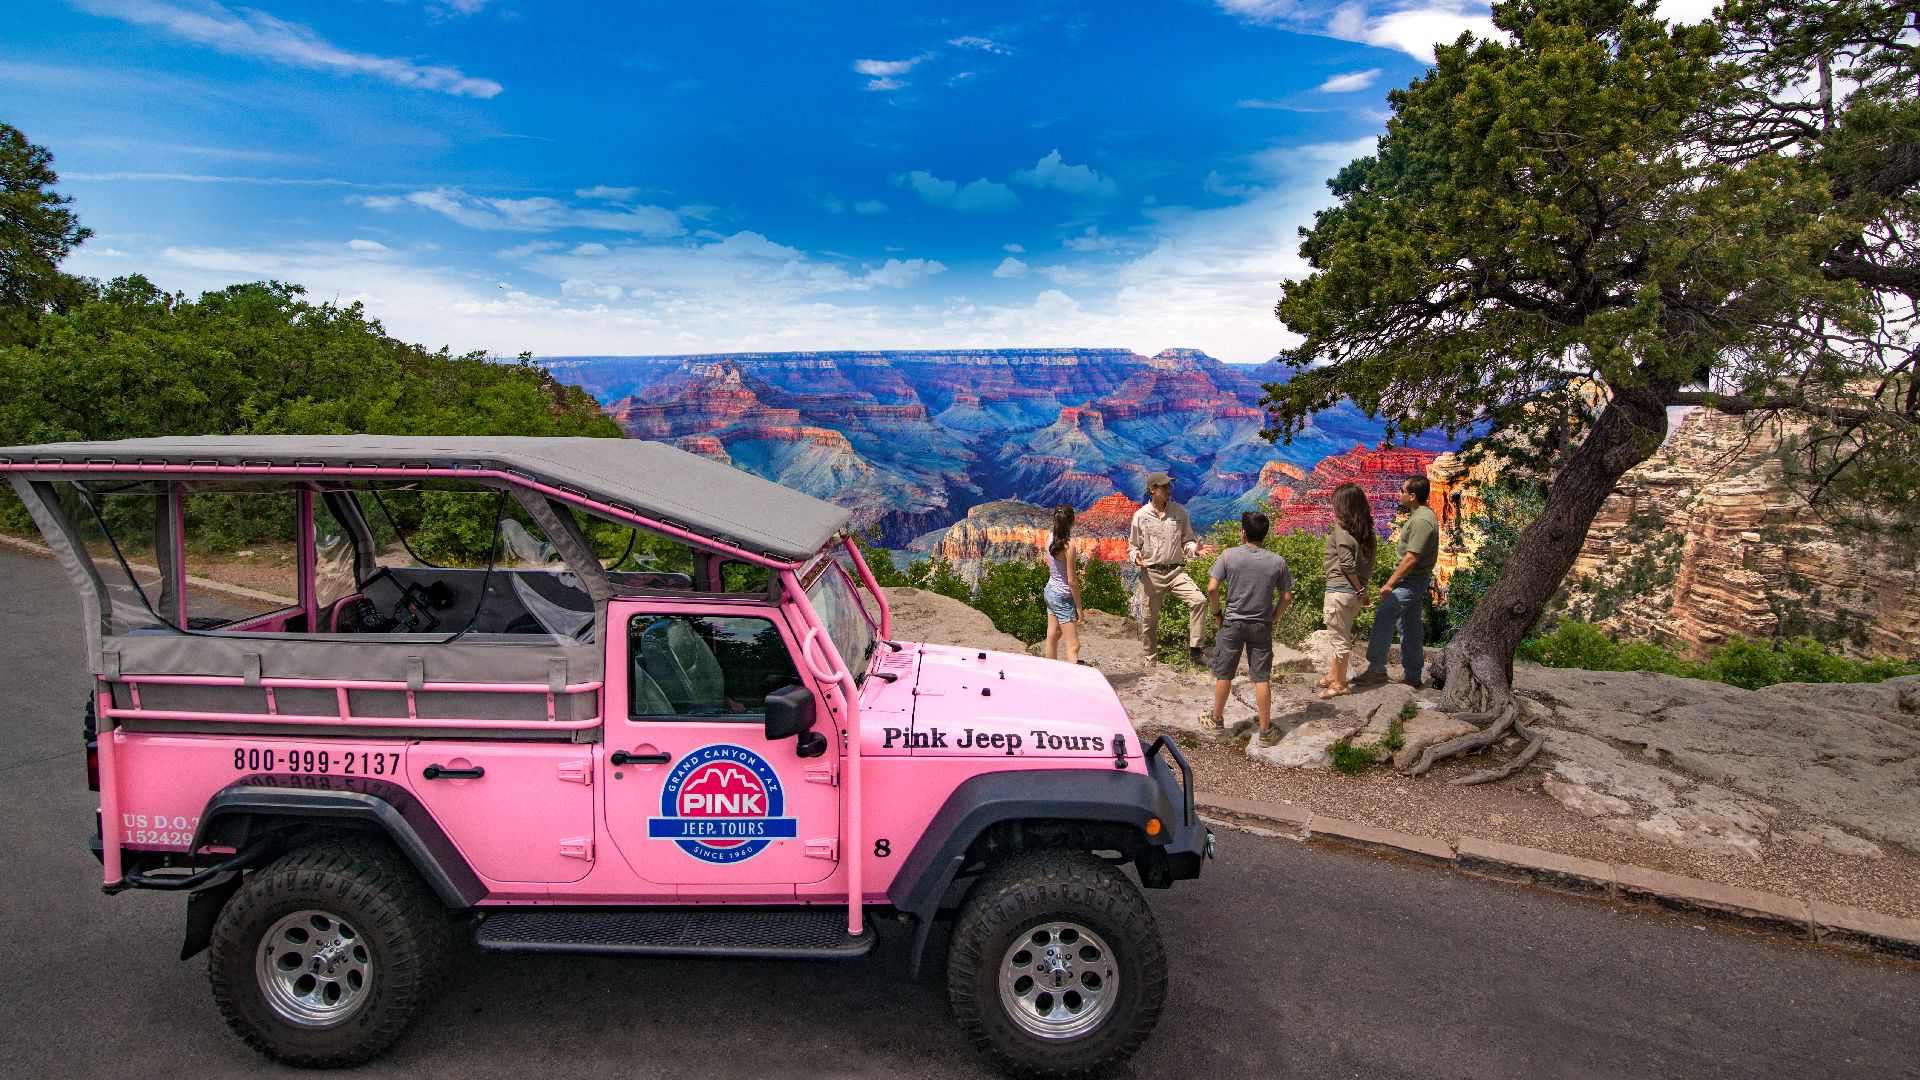 The Grand Entrance Jeep Tour From Grand Canyon South Rim